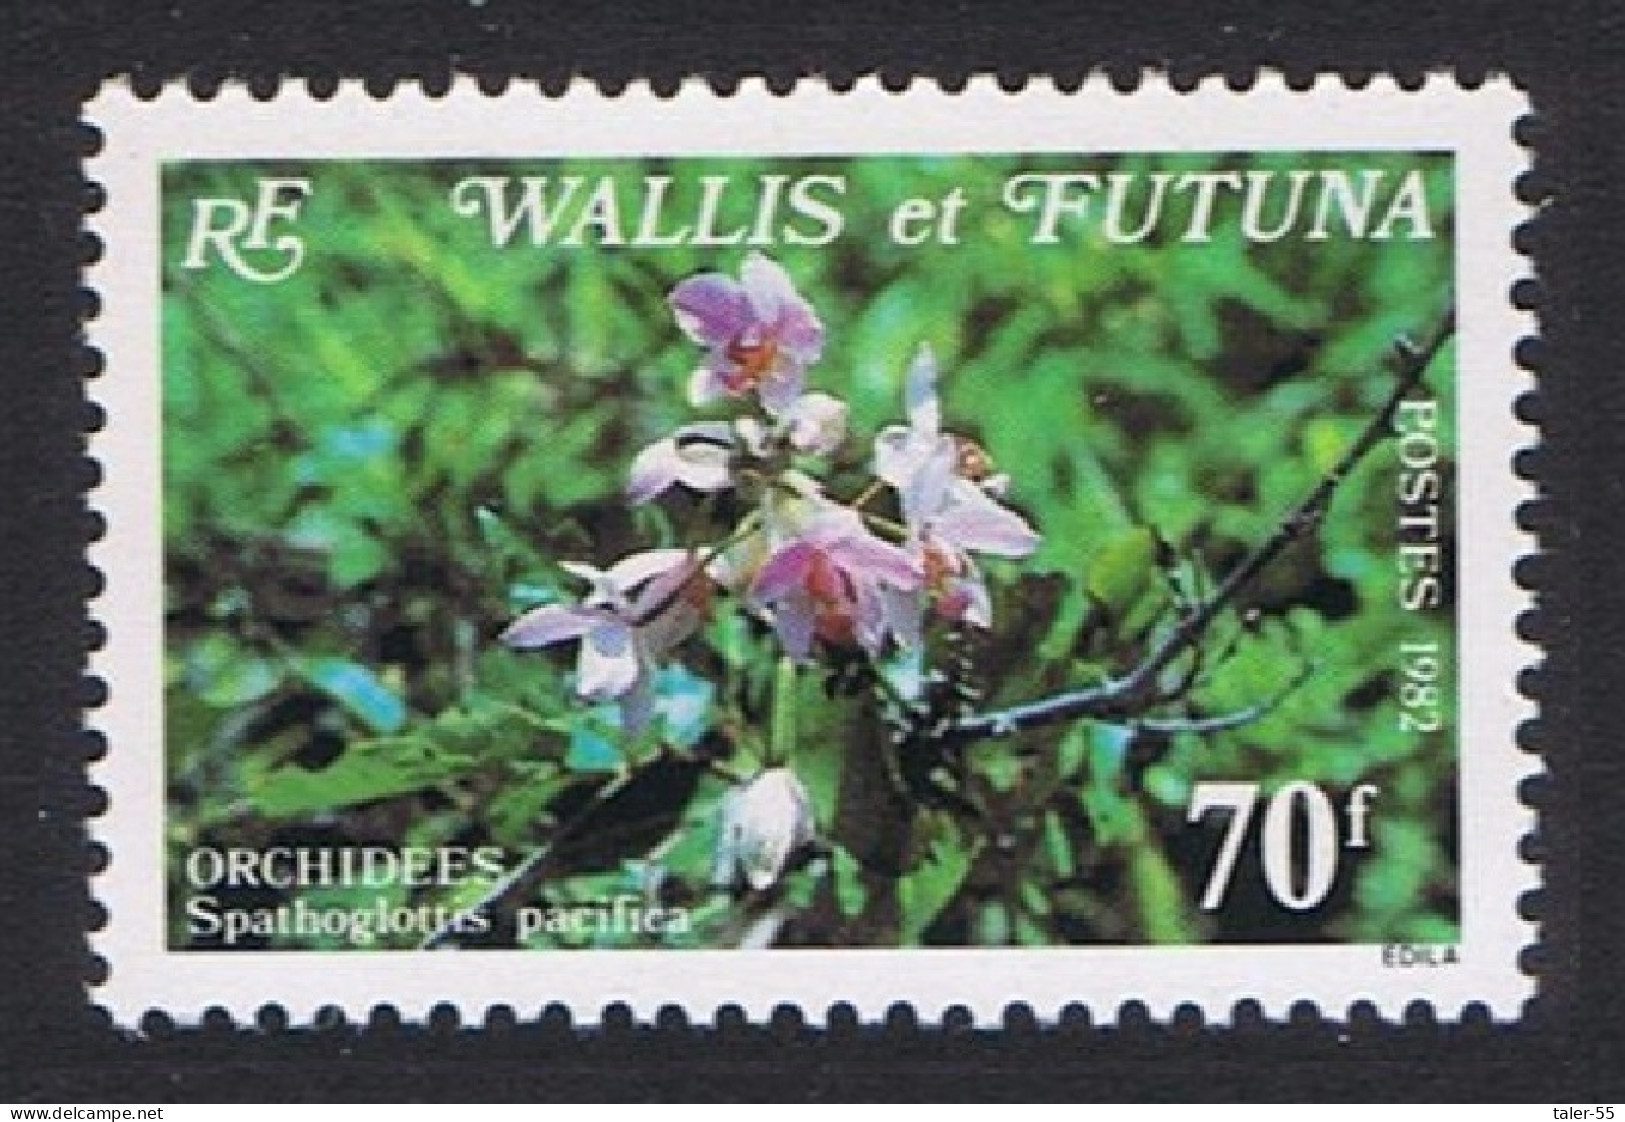 Wallis And Futuna Orchids Spathoglottis Pacifica 70f 1982 MNH SG#398 Sc#285 - Unused Stamps